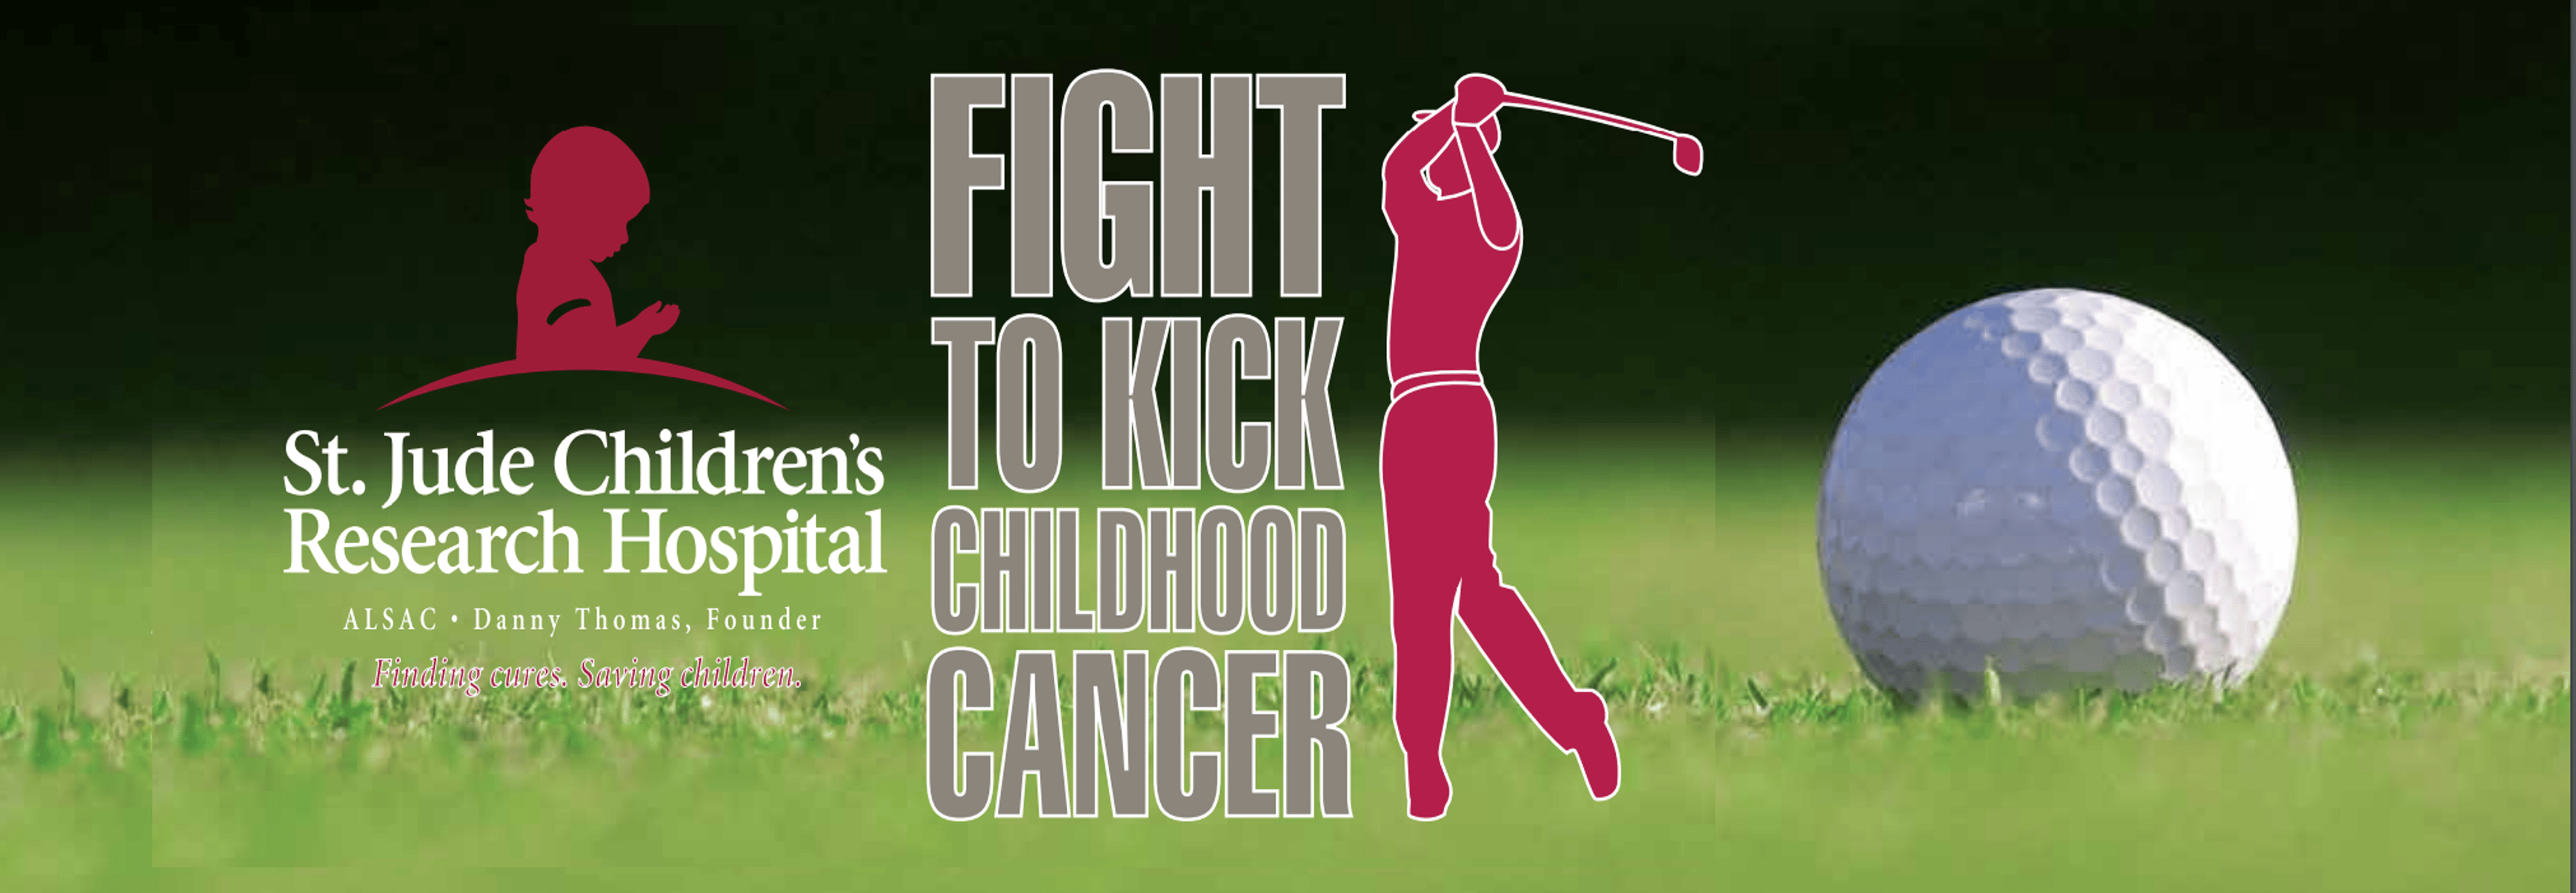 The Annual Fight To Kick Childhood Cancer Charity Golf Tournament